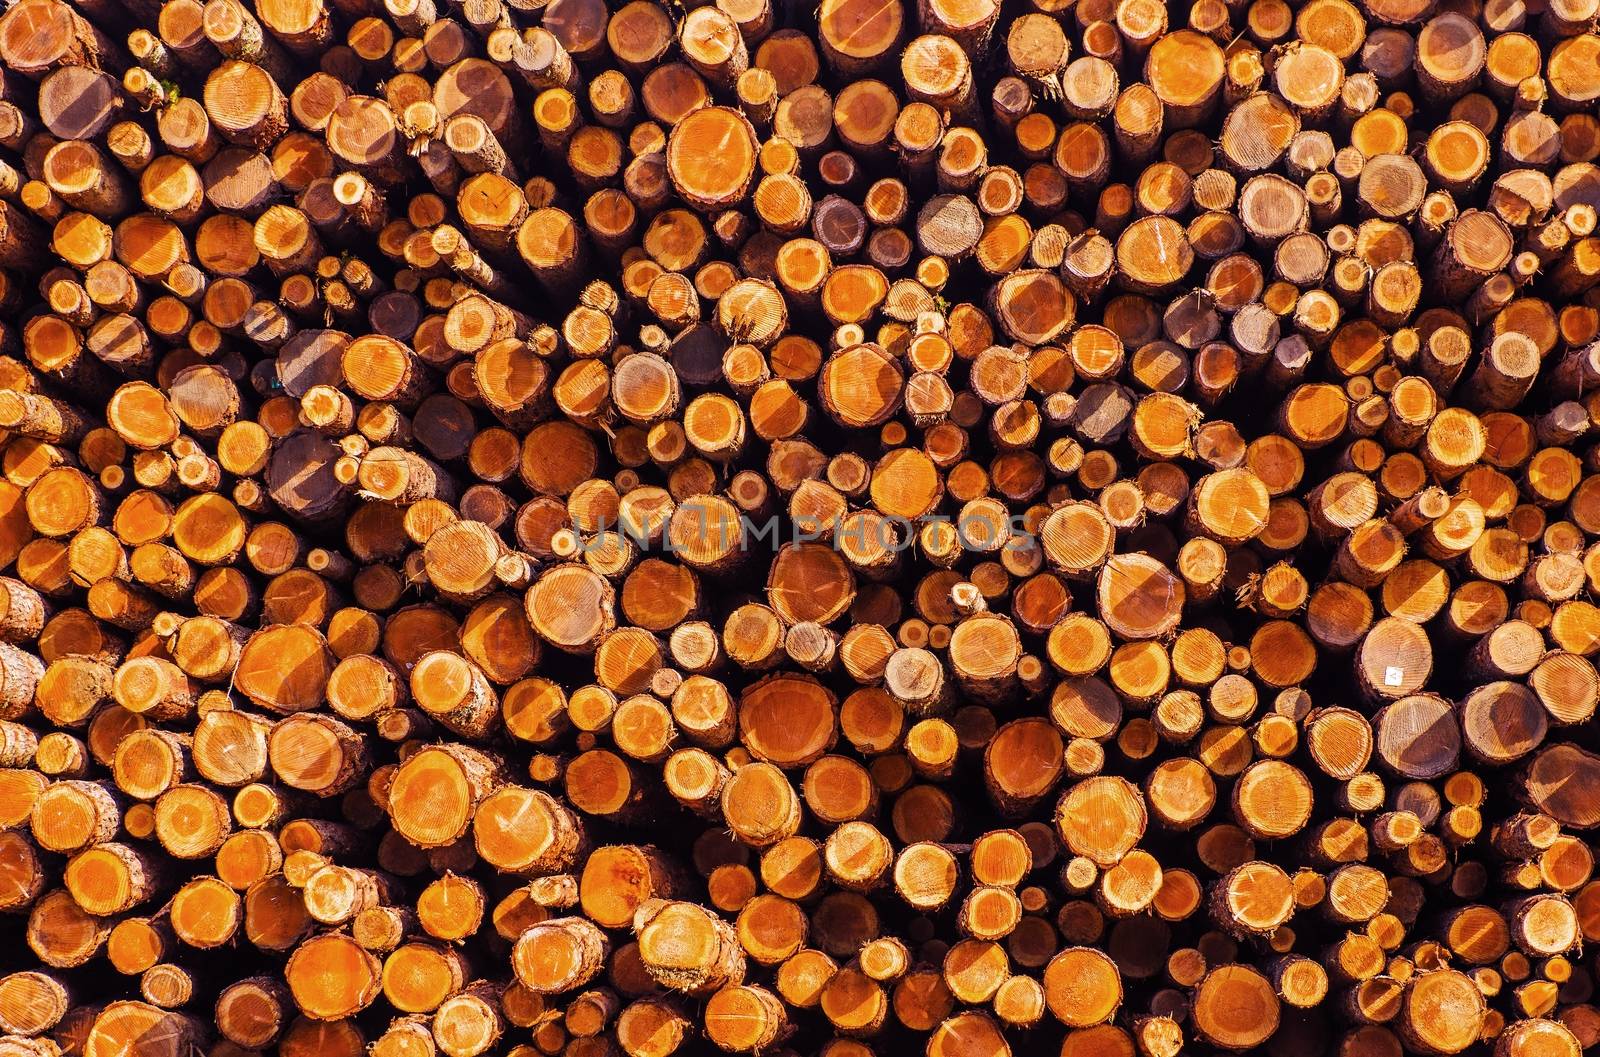 Pile of Lumber. Timber Industry Photo Background. Wooden Logs Pile.